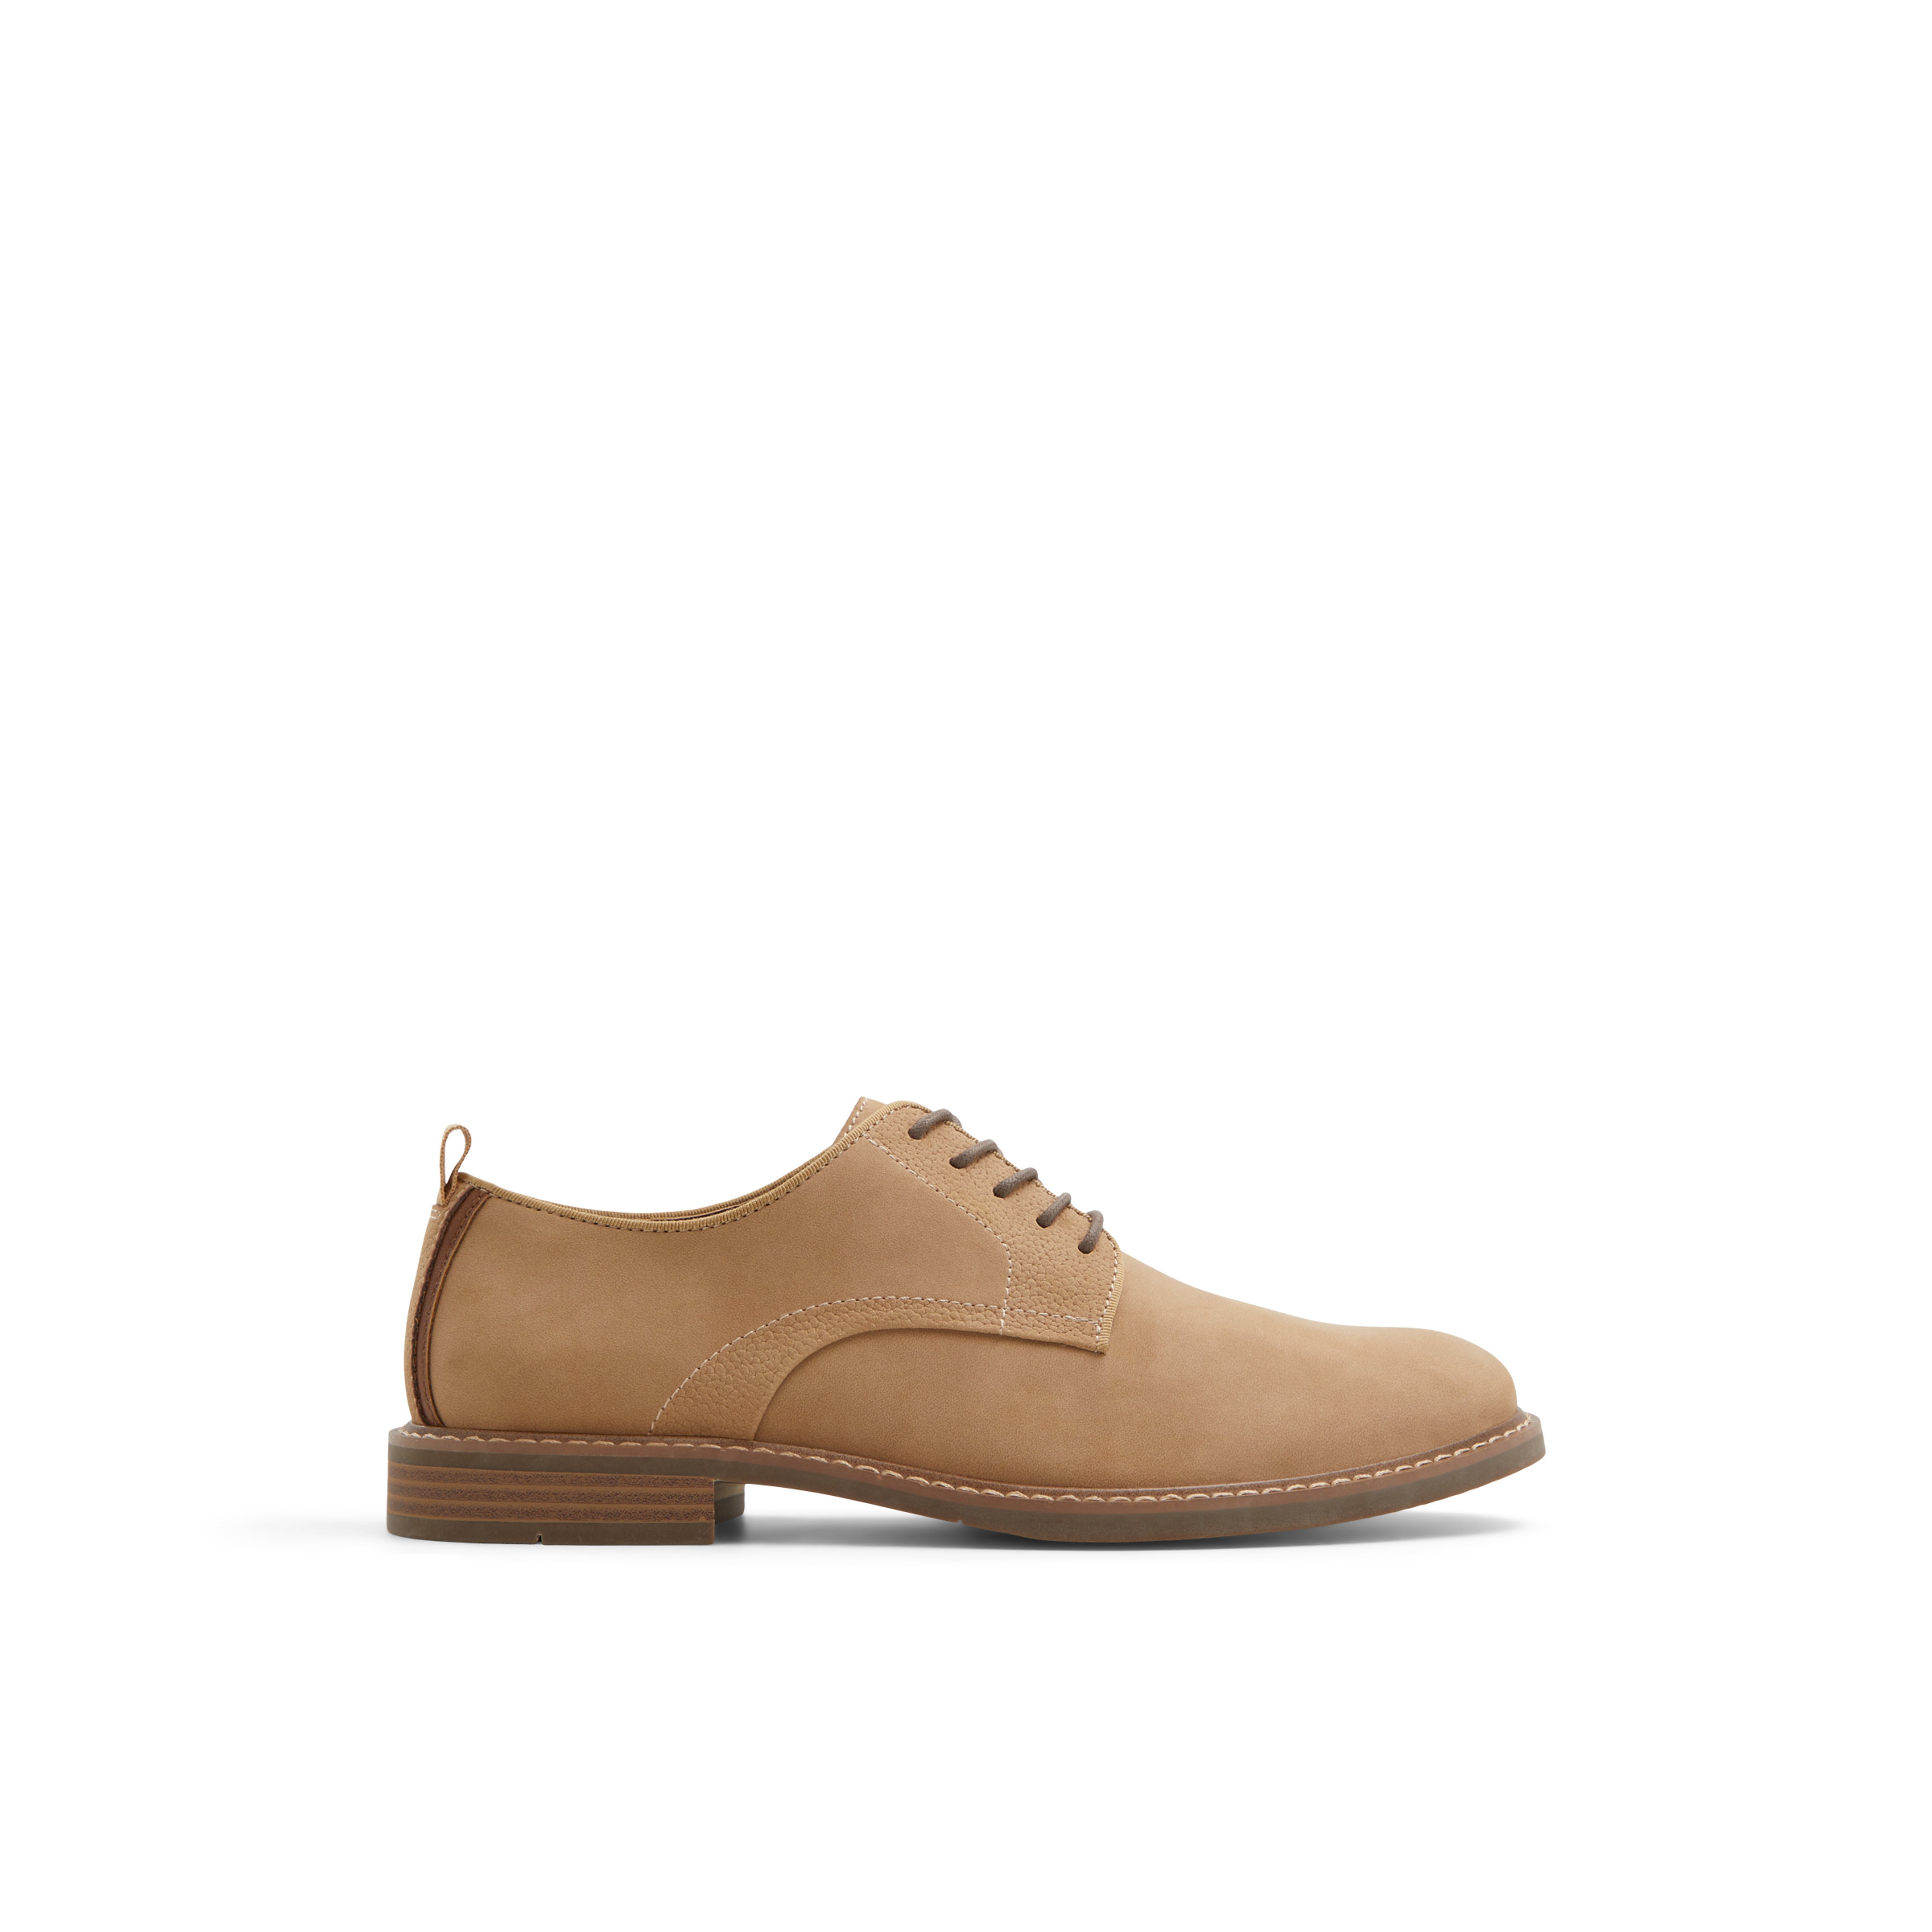 Newland Derby shoes